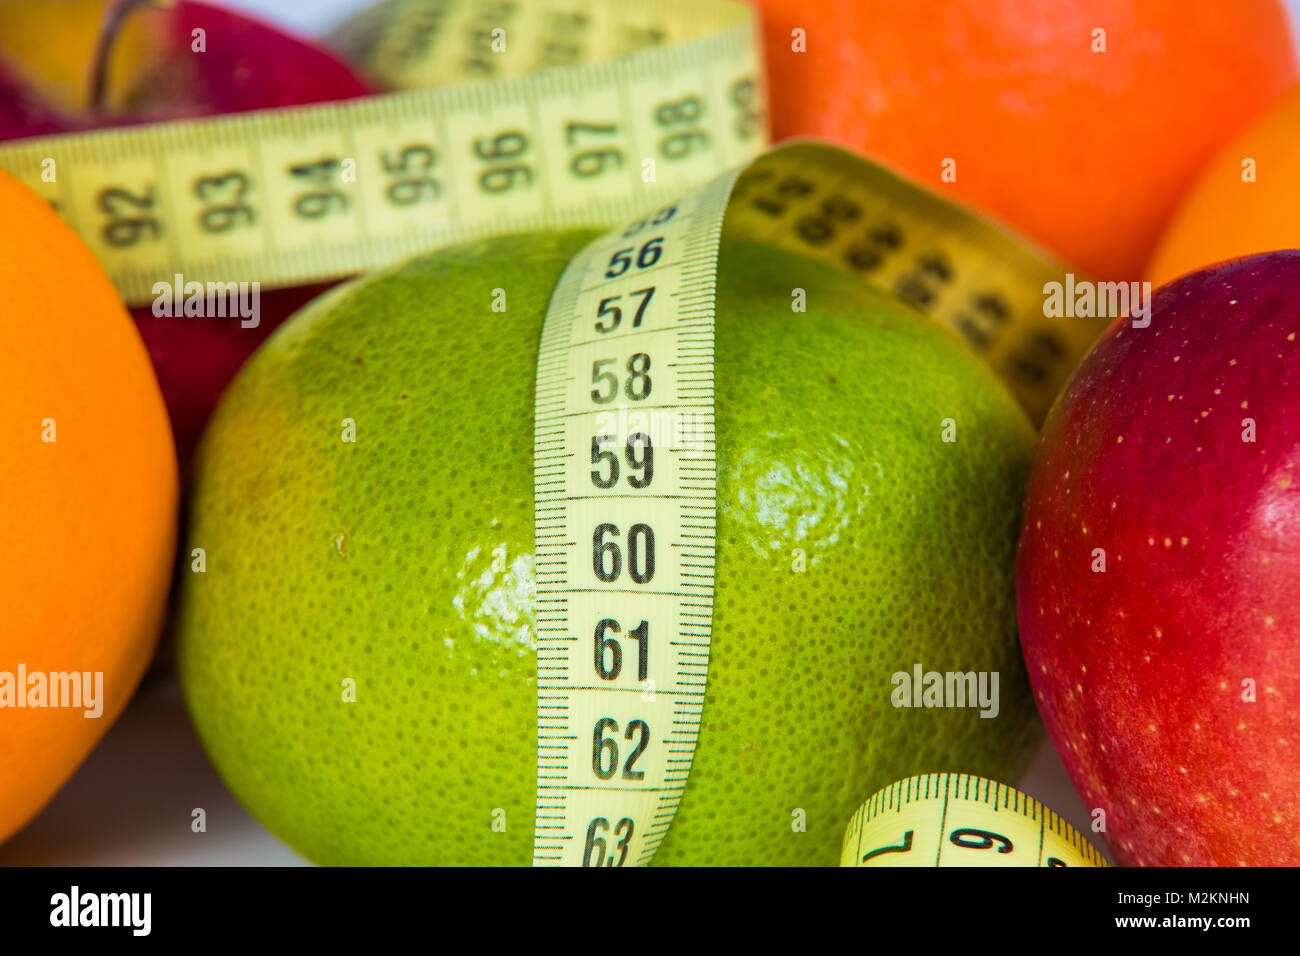 Measuring tape on green grapefruit close-up. Diet background. Stock Photo